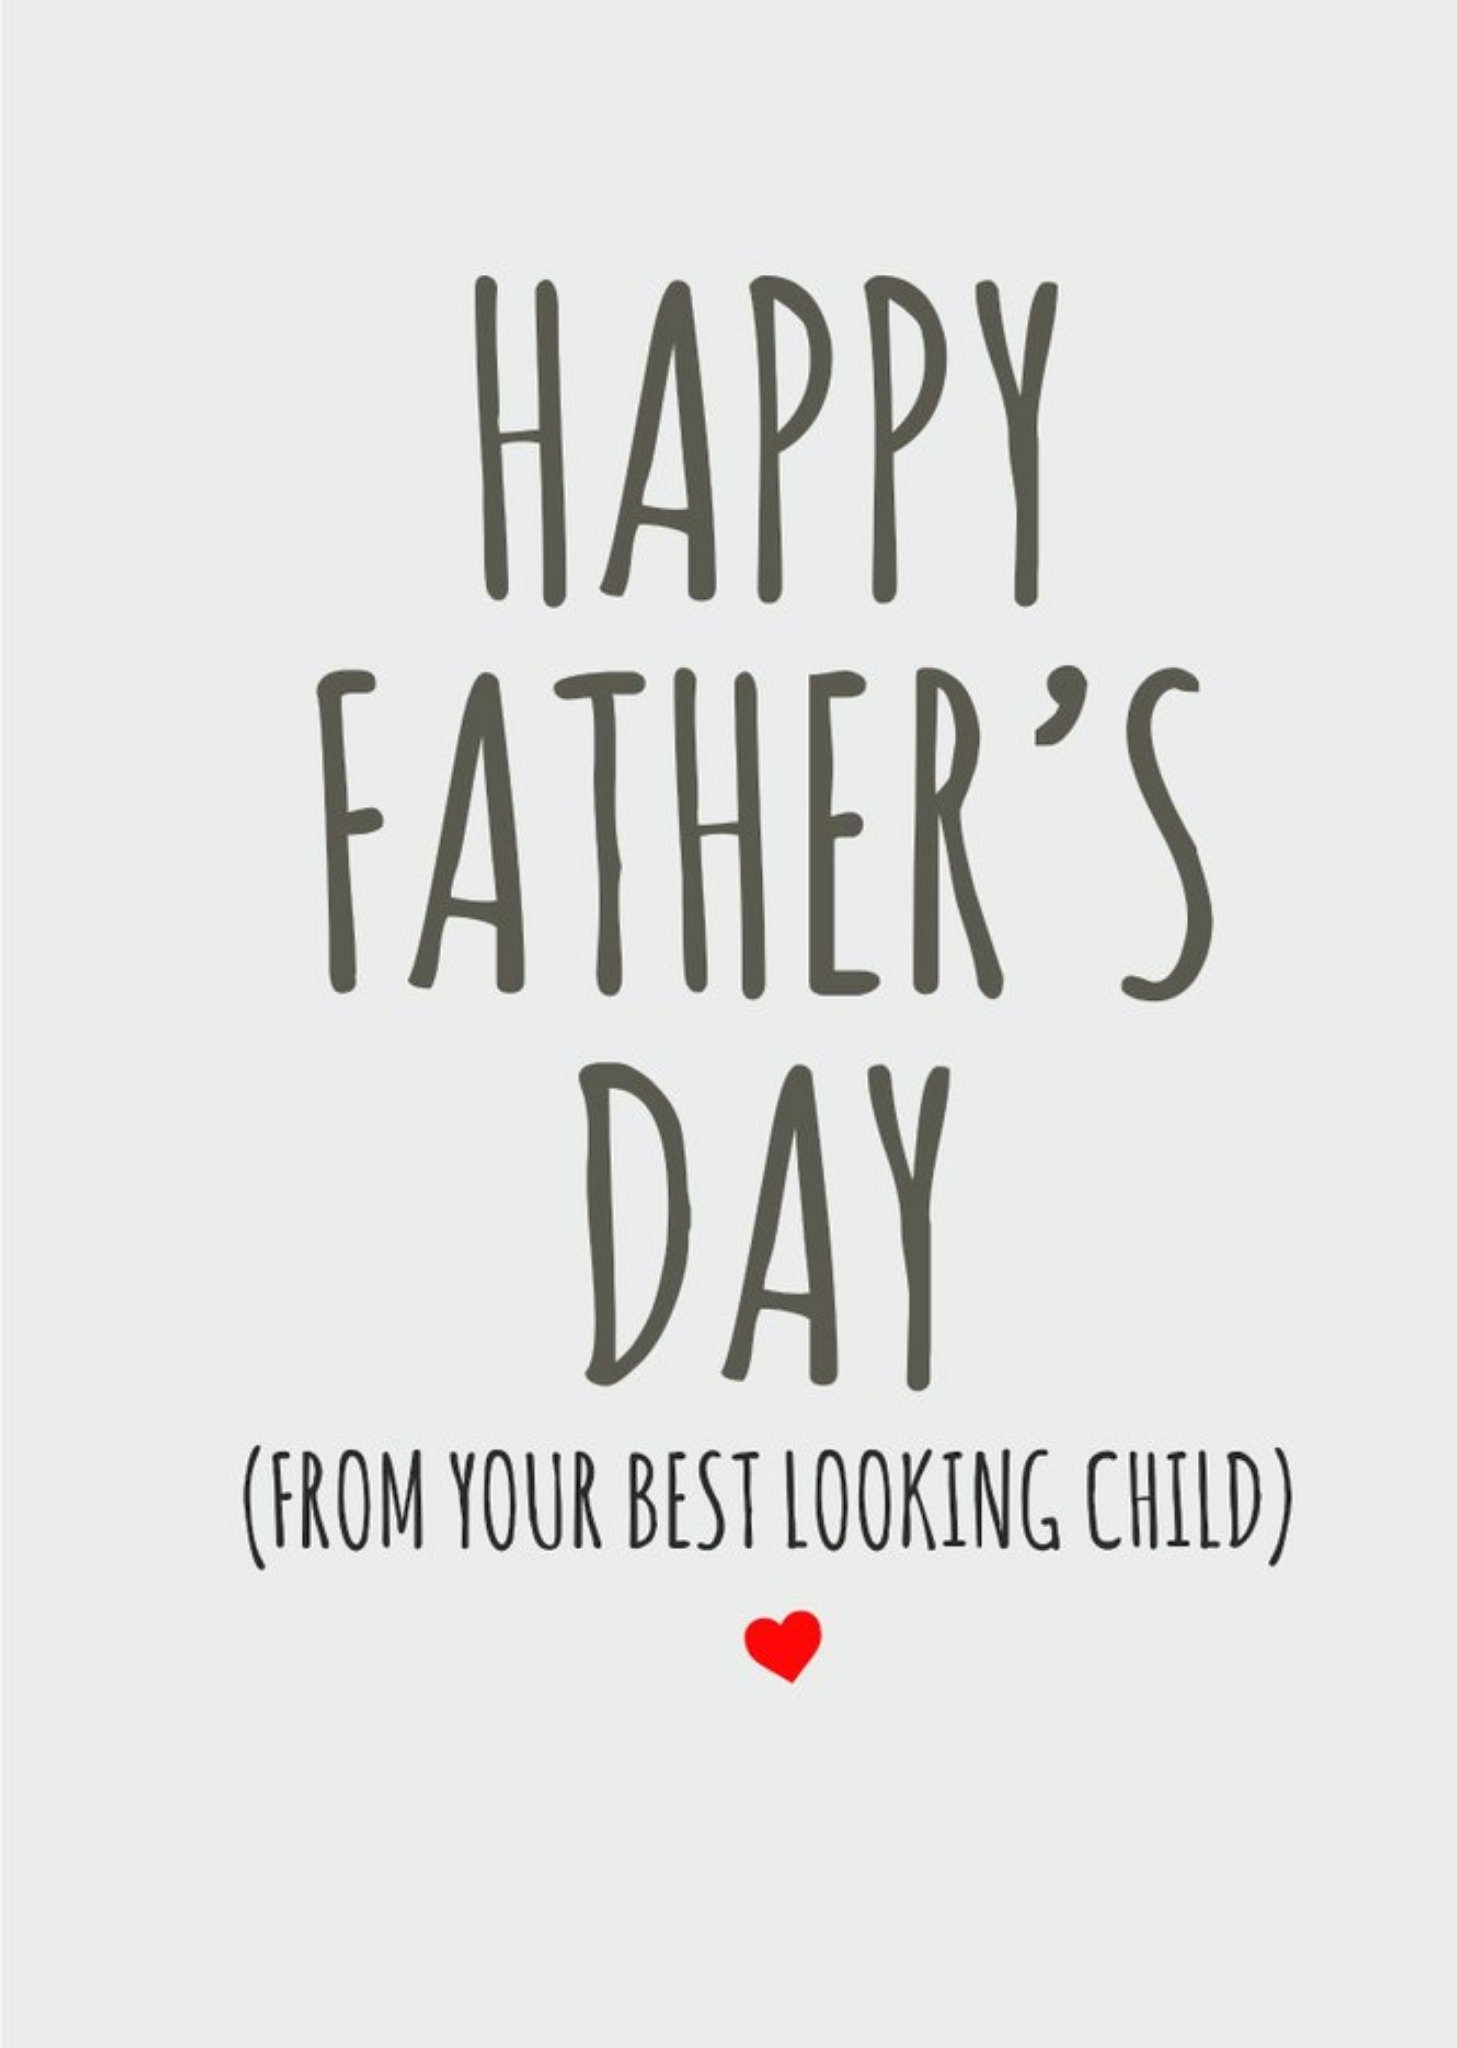 Banter King Typographical Funny Happy Fathers Day From Your Best Looking Child Card Ecard